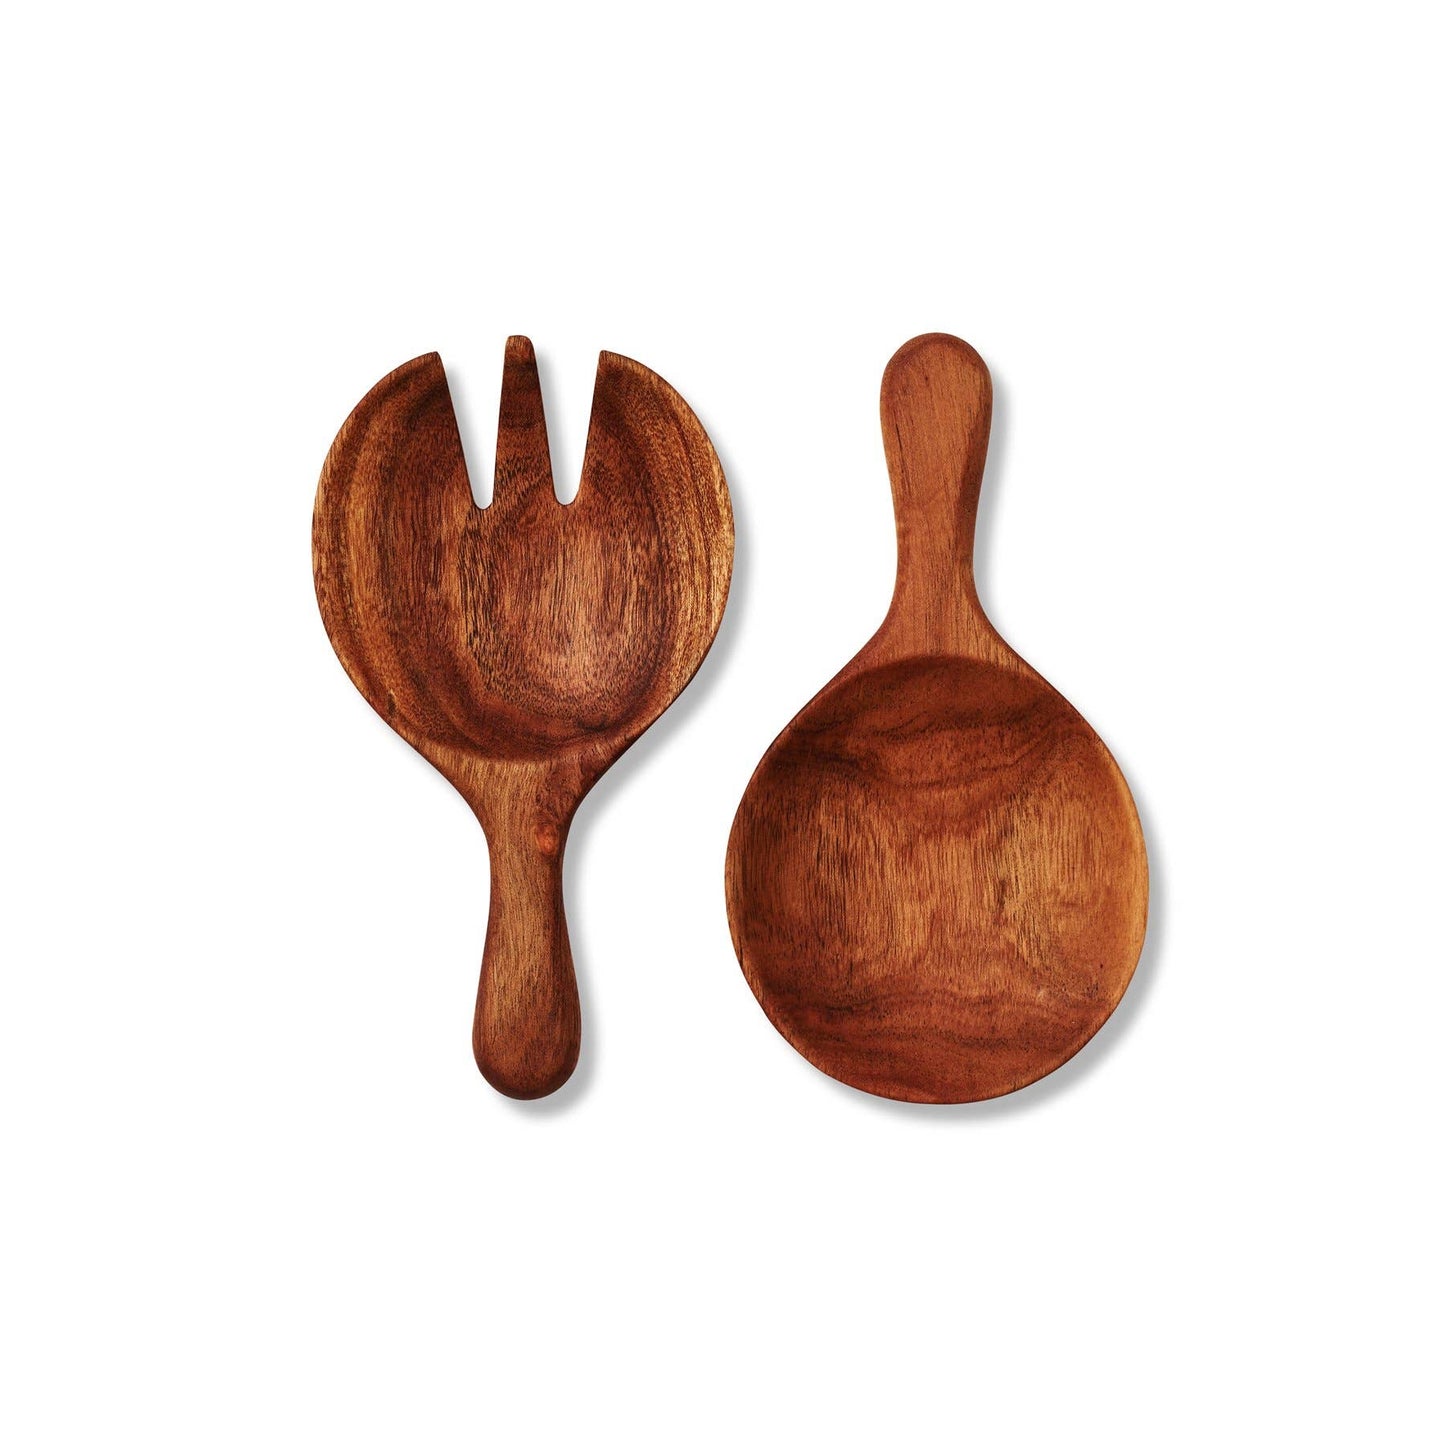 Forestry Salad Paddles, Set of 2 (Min of 4)